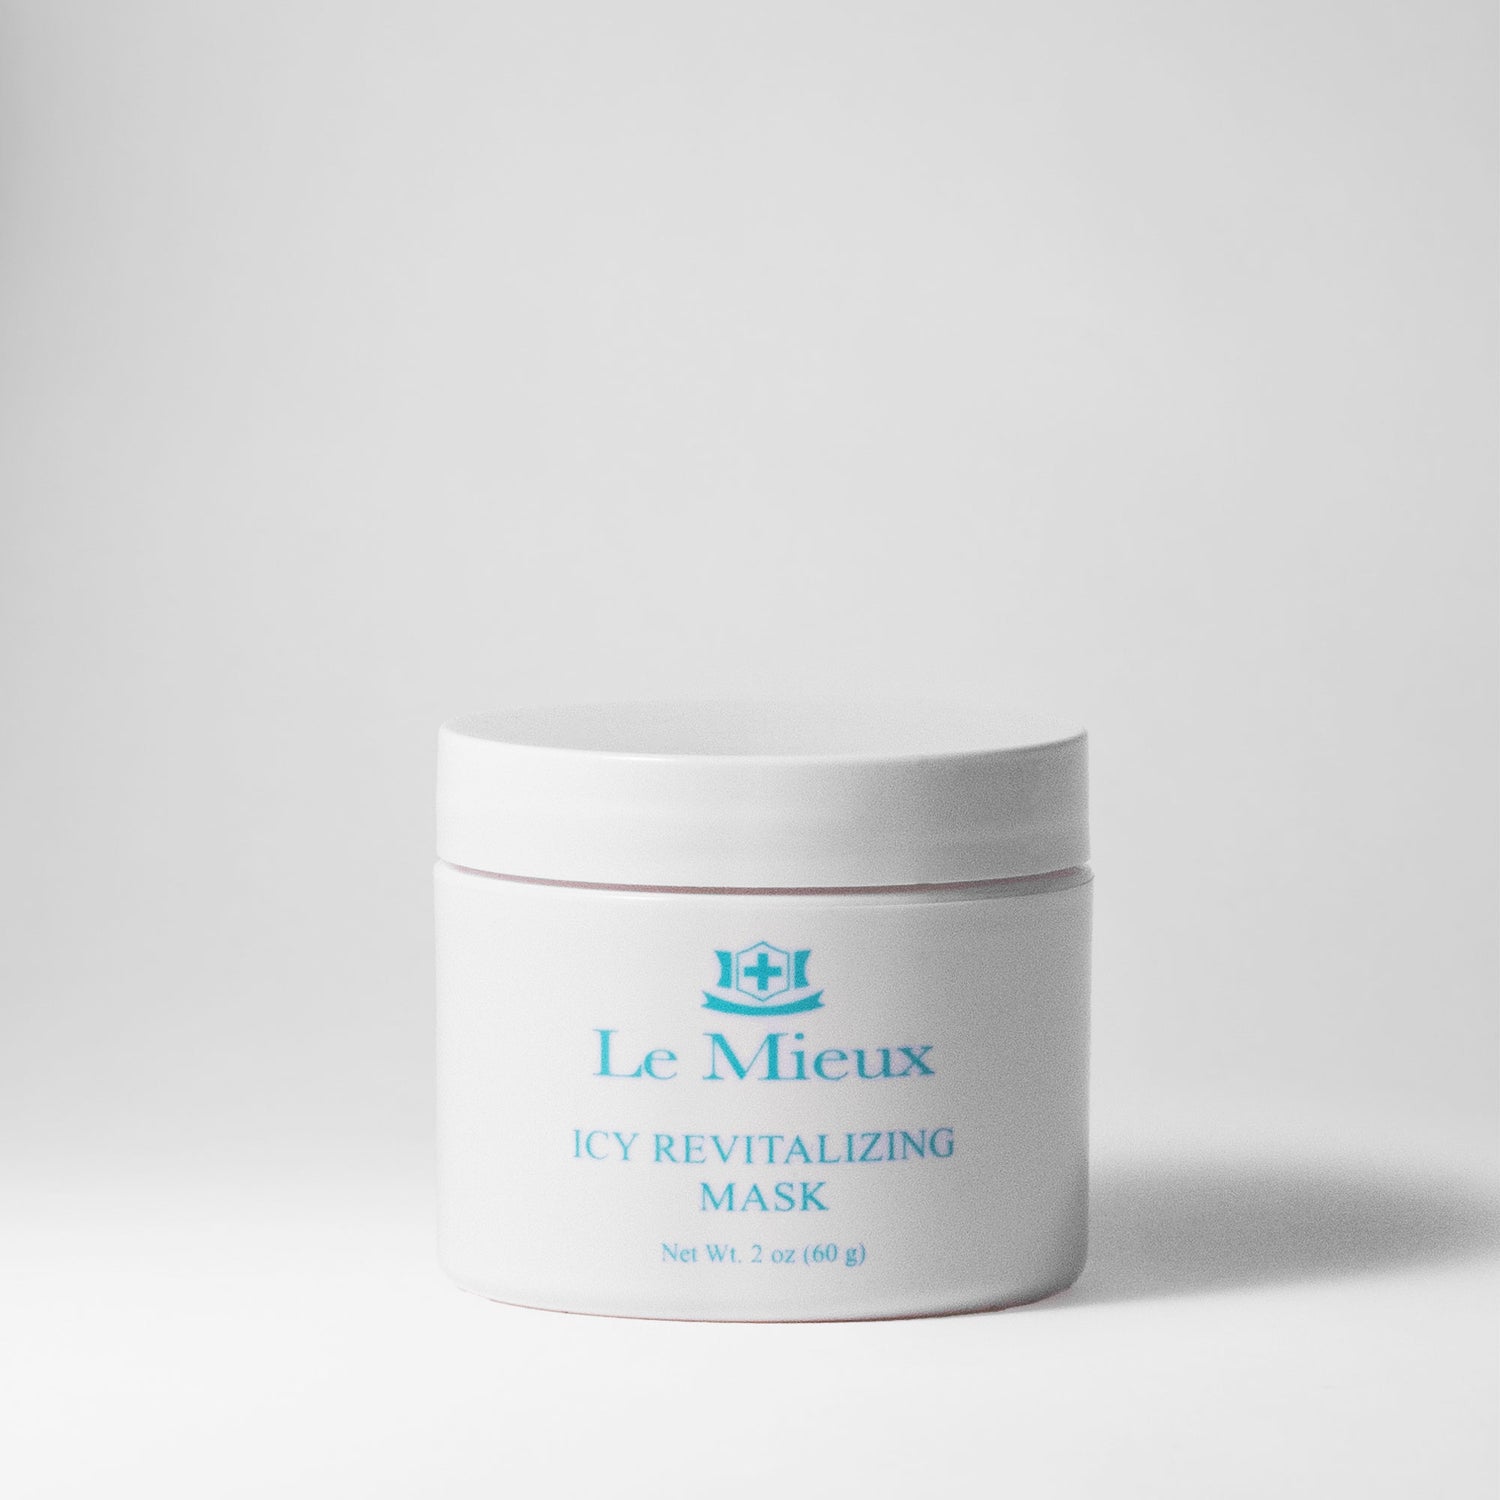  ICY REVITALIZING MASK from Le Mieux Skincare - 1